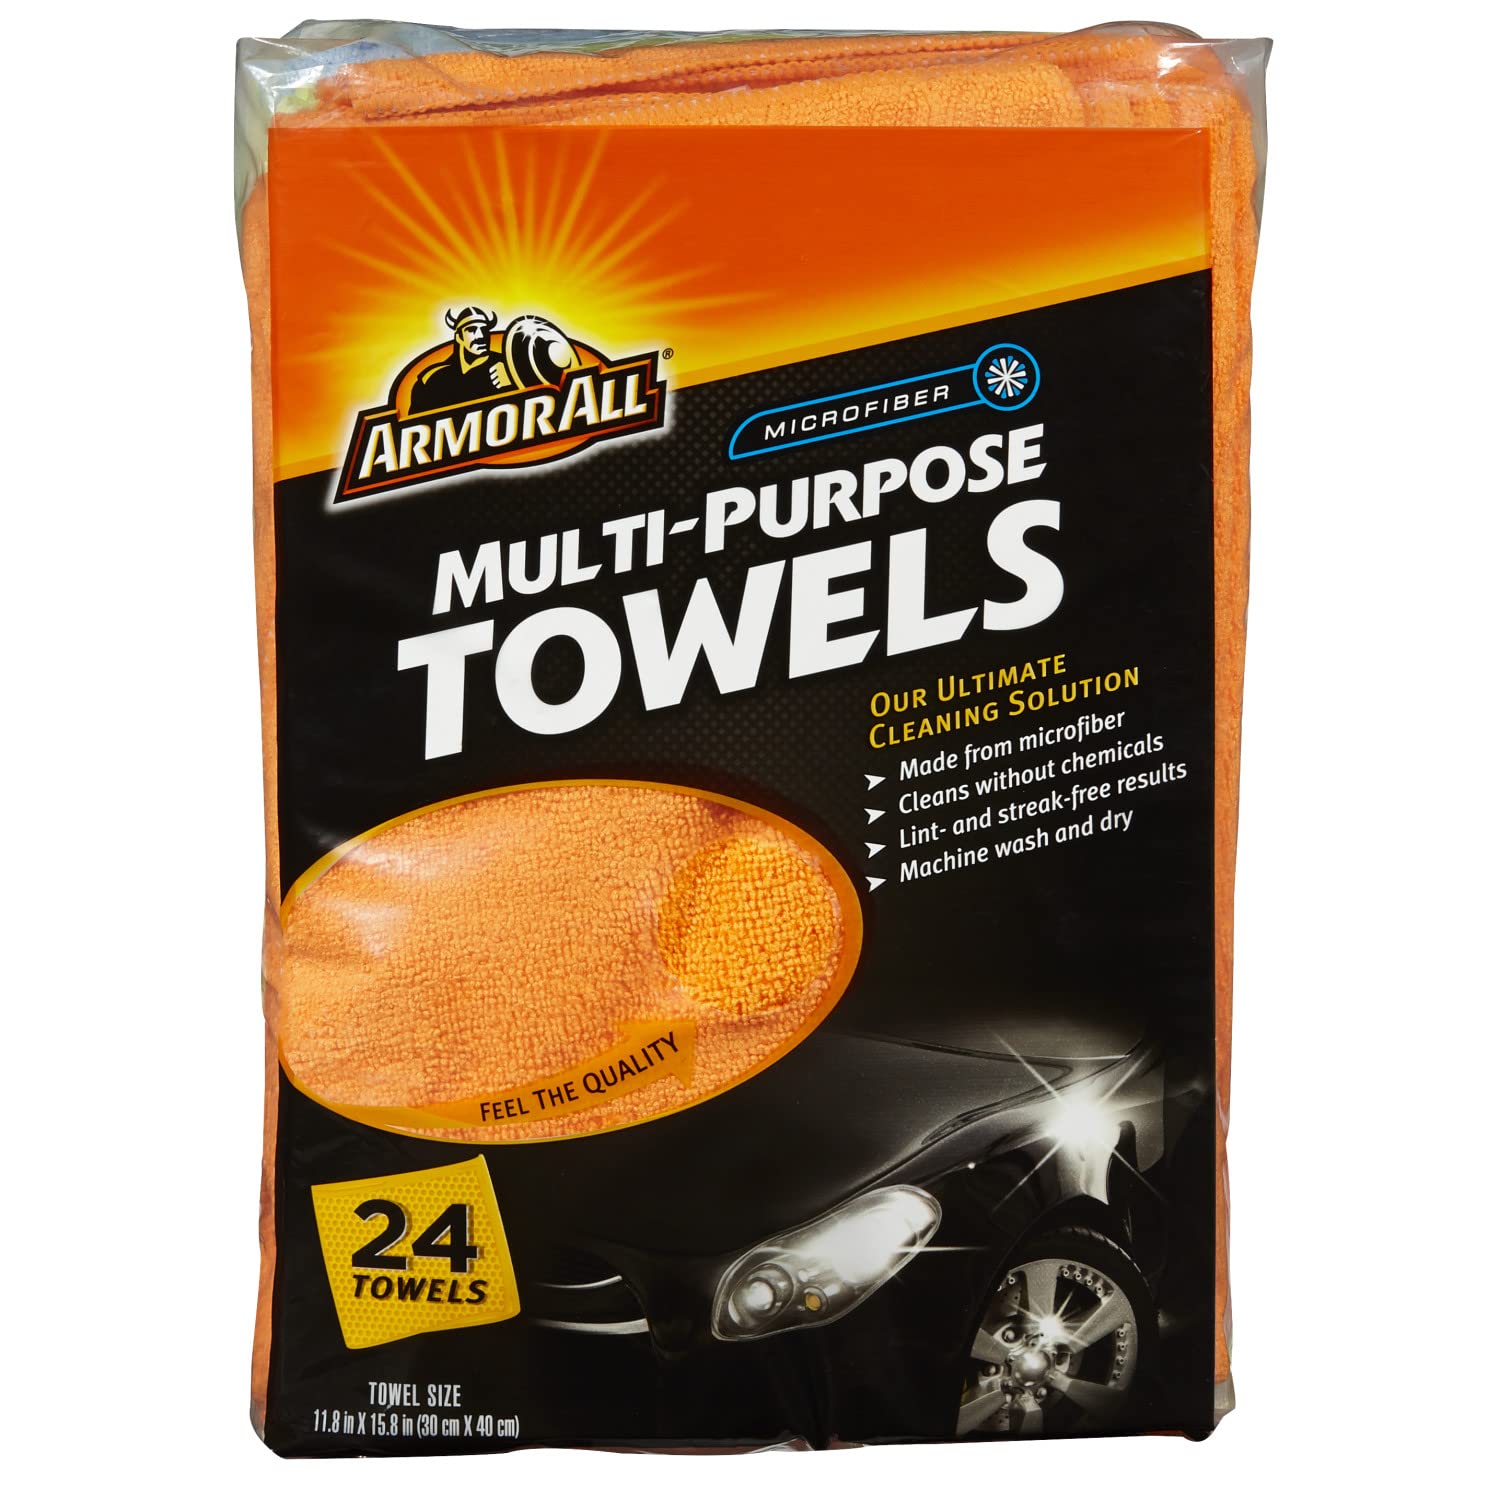 Microfiber Towels by Armor All, Multi-Purpose Towels for Cleaning, 24 Each